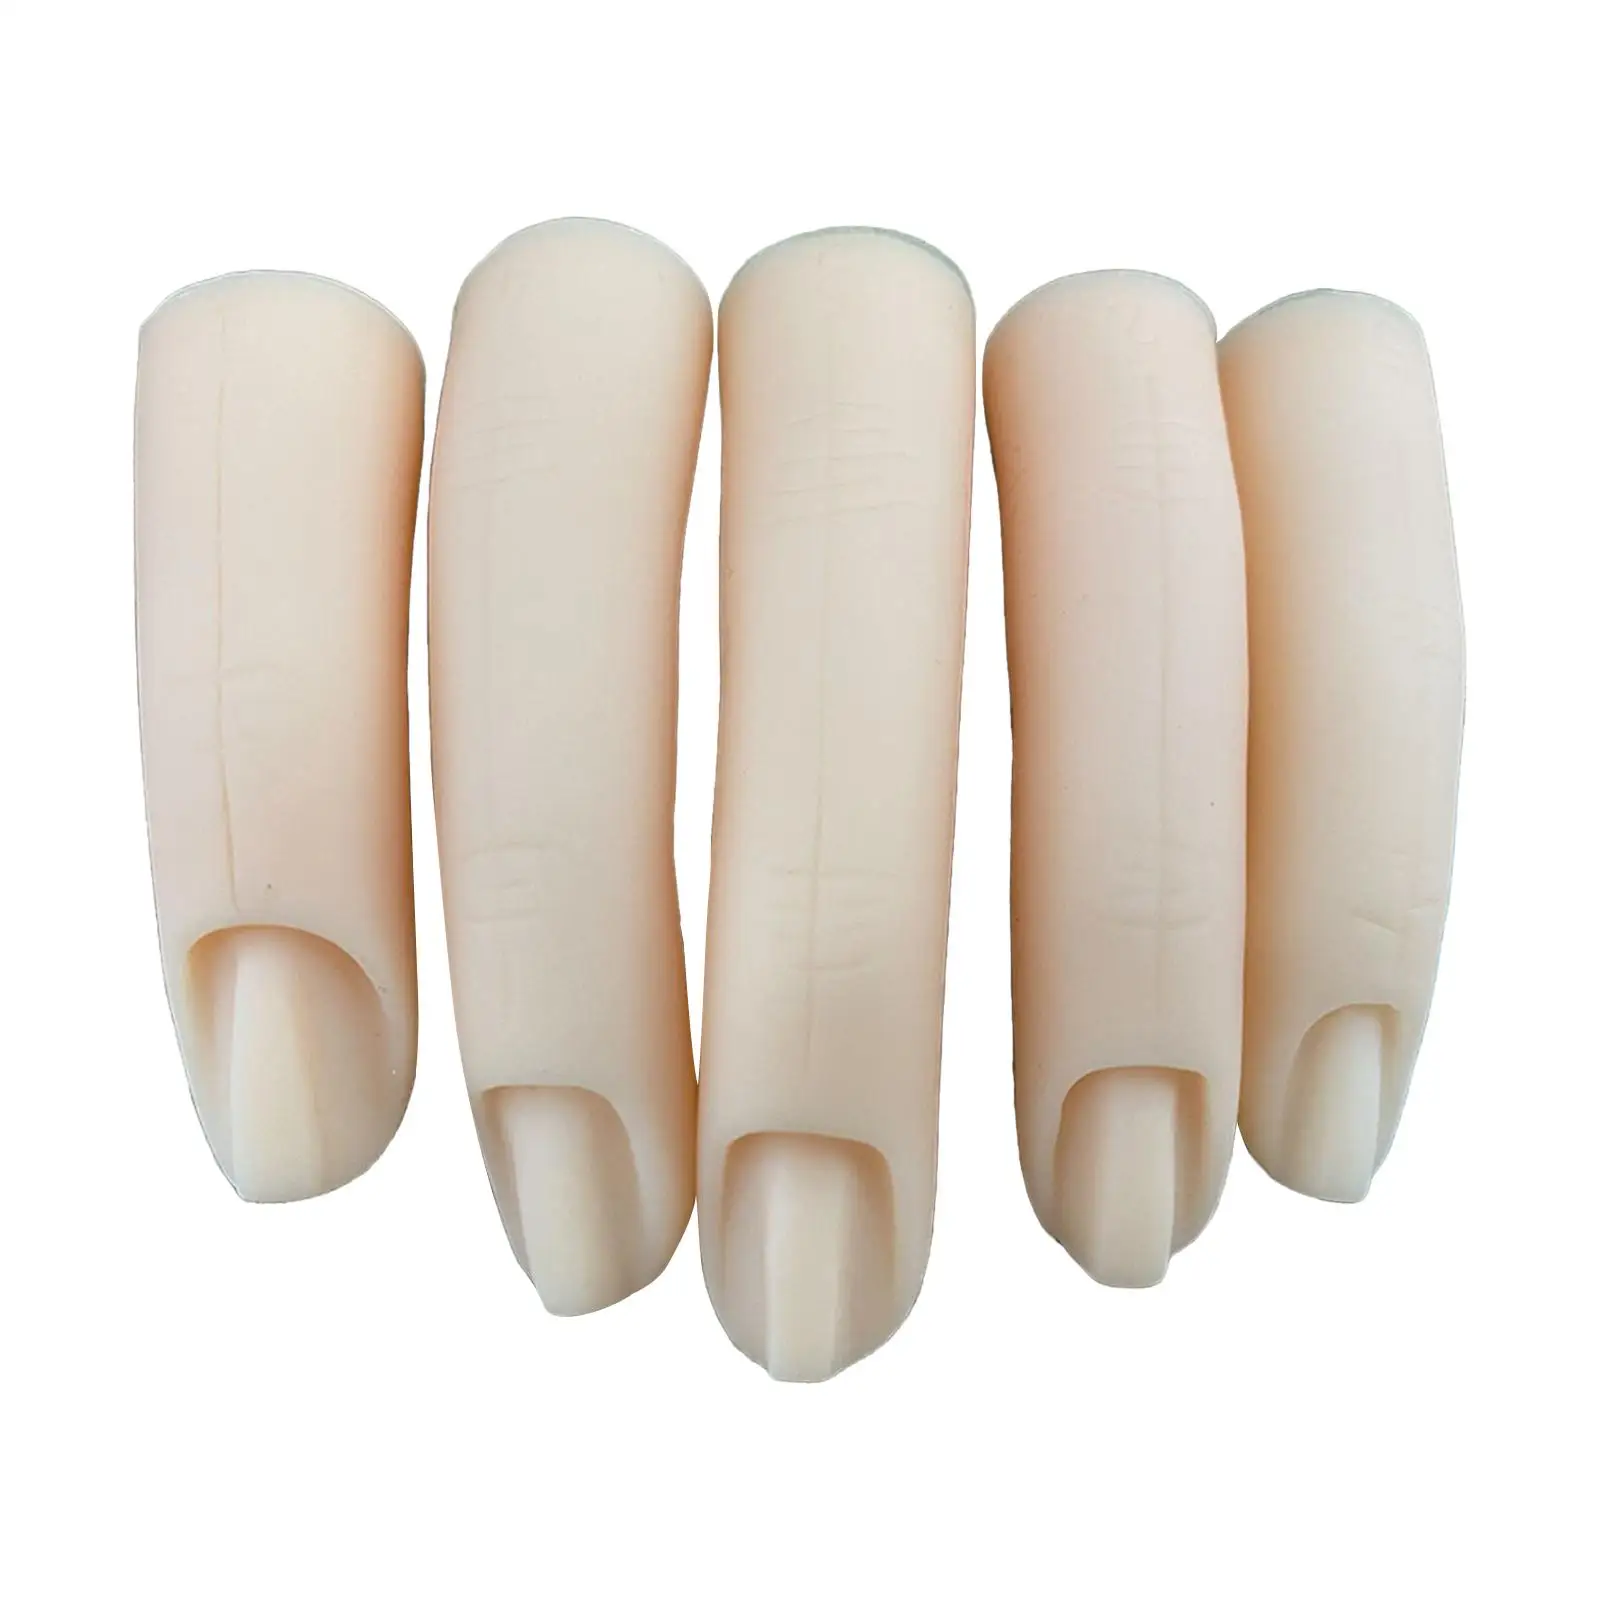 5x Silicone Practice Finger Training Display Tools Soft Mannequin Hands Reusable Nail Pratice Training Finger for Acrylic Nails